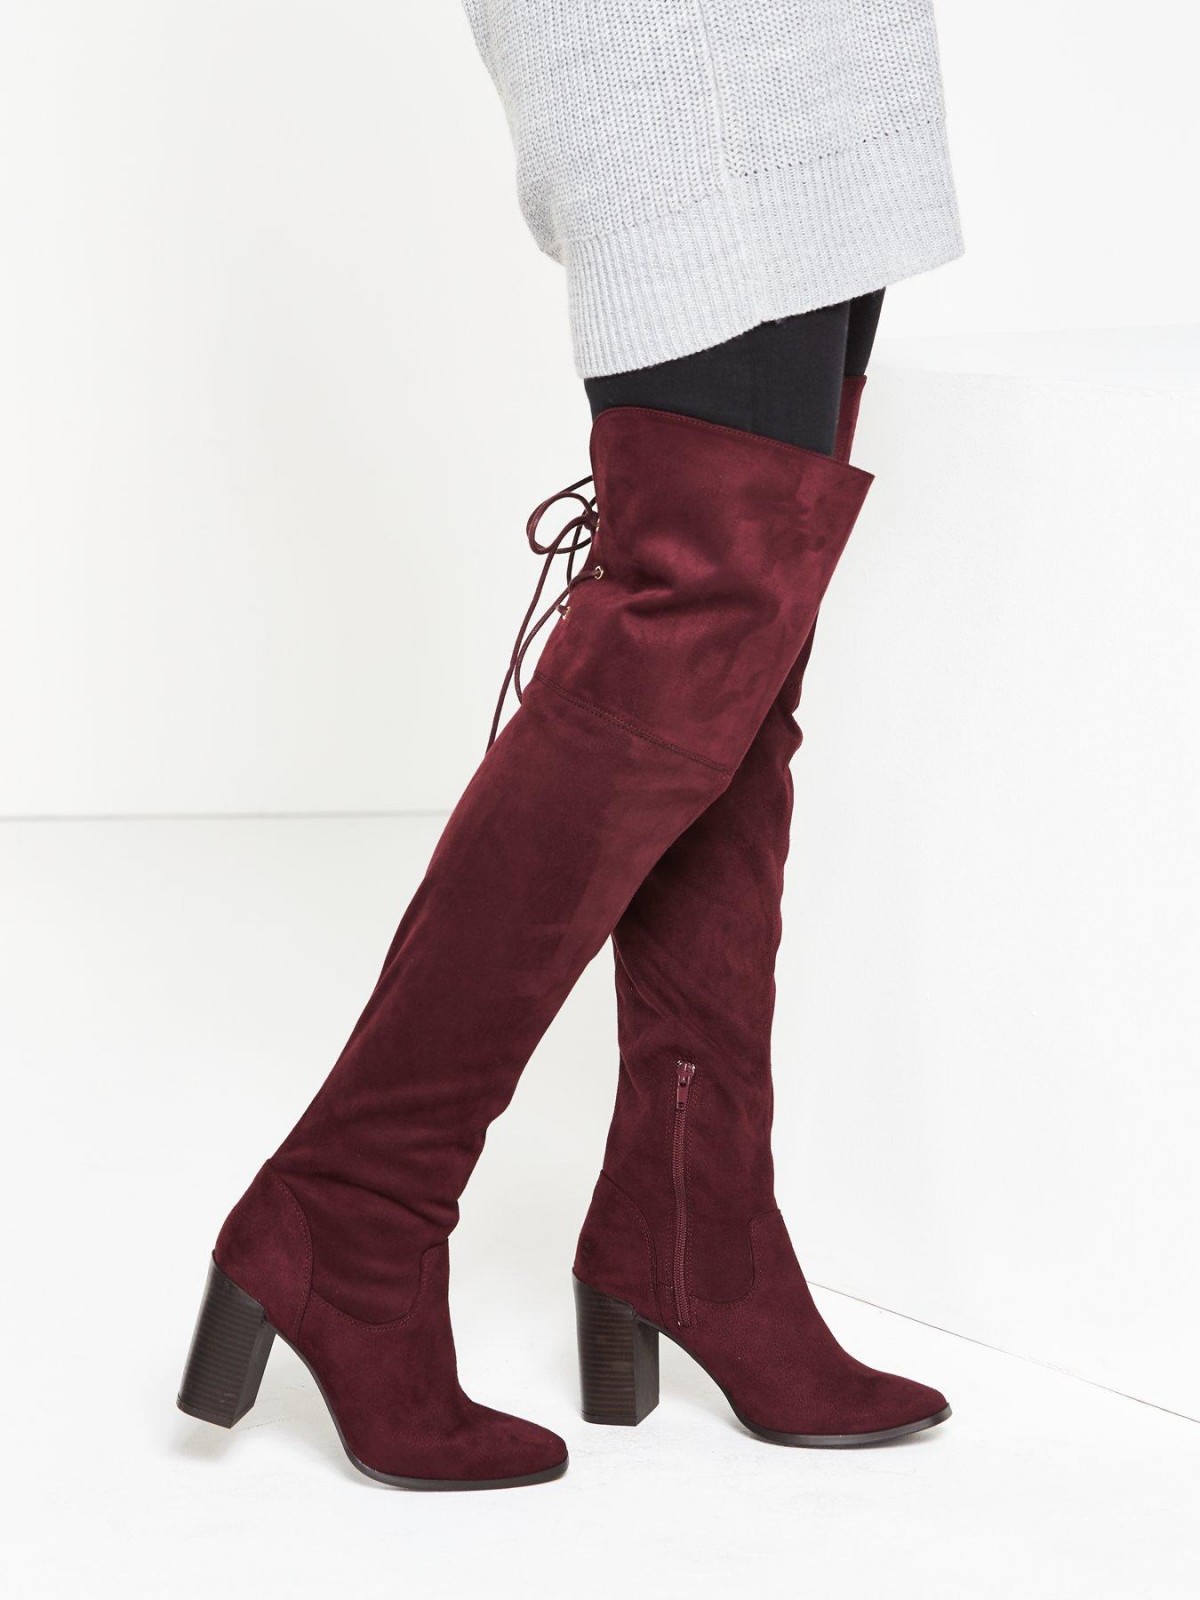 Lucy Mecklenburgh thigh-high boots – Shoes Post